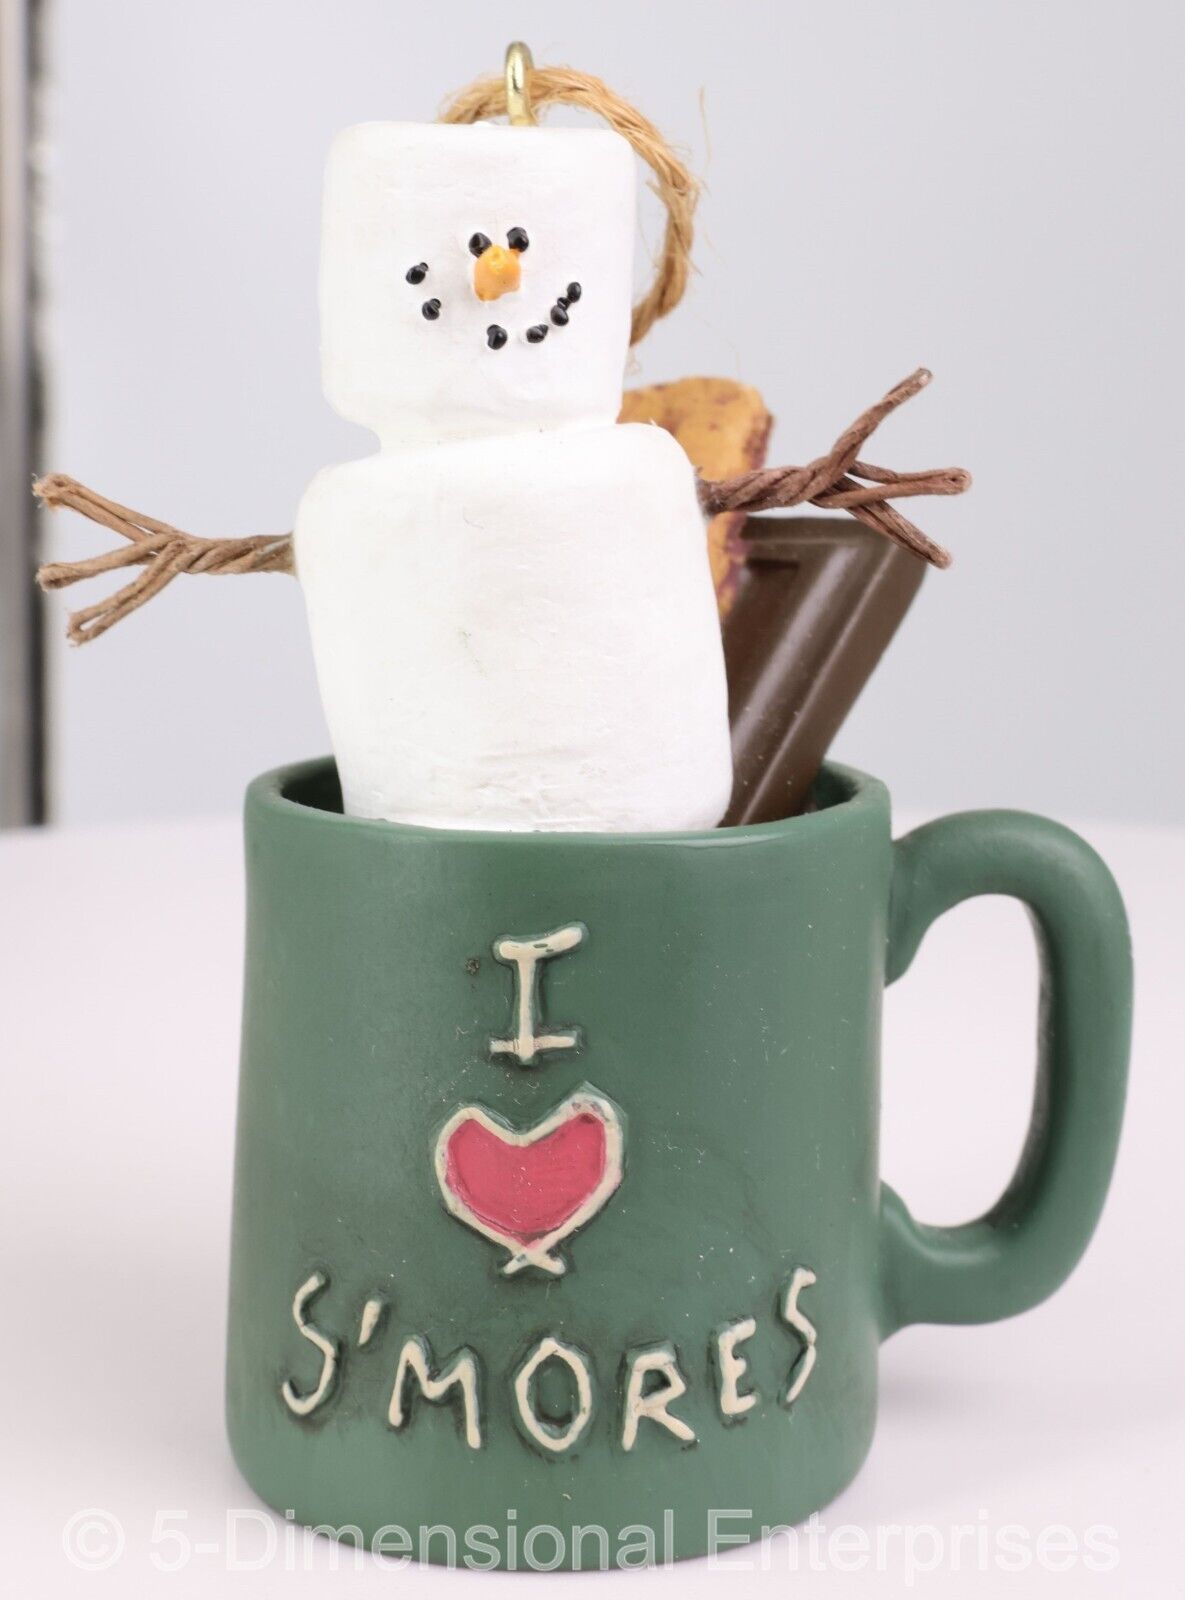 Original S\'mores I LOVE S\'MORES Snowman in Mug Ornament - Midwest Cannon Falls